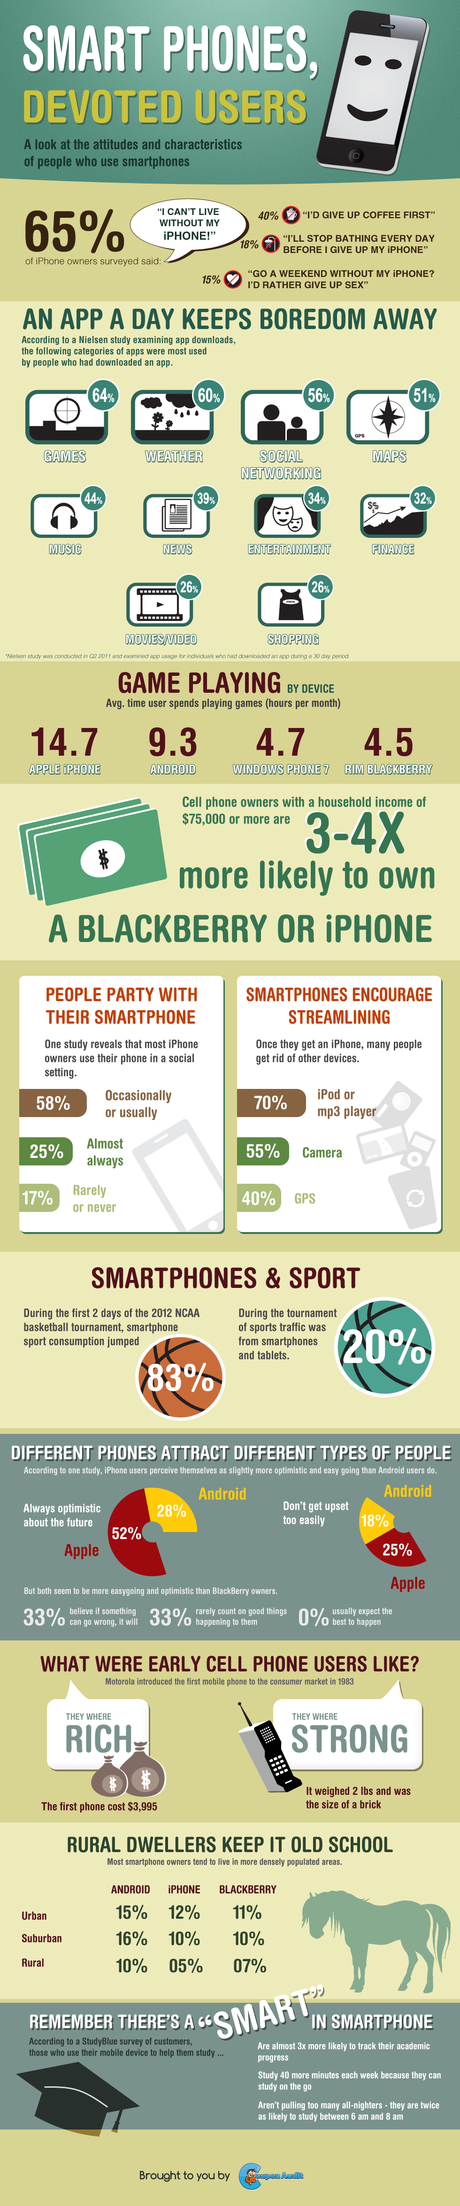 Profile of a Smart Phone User Infographic